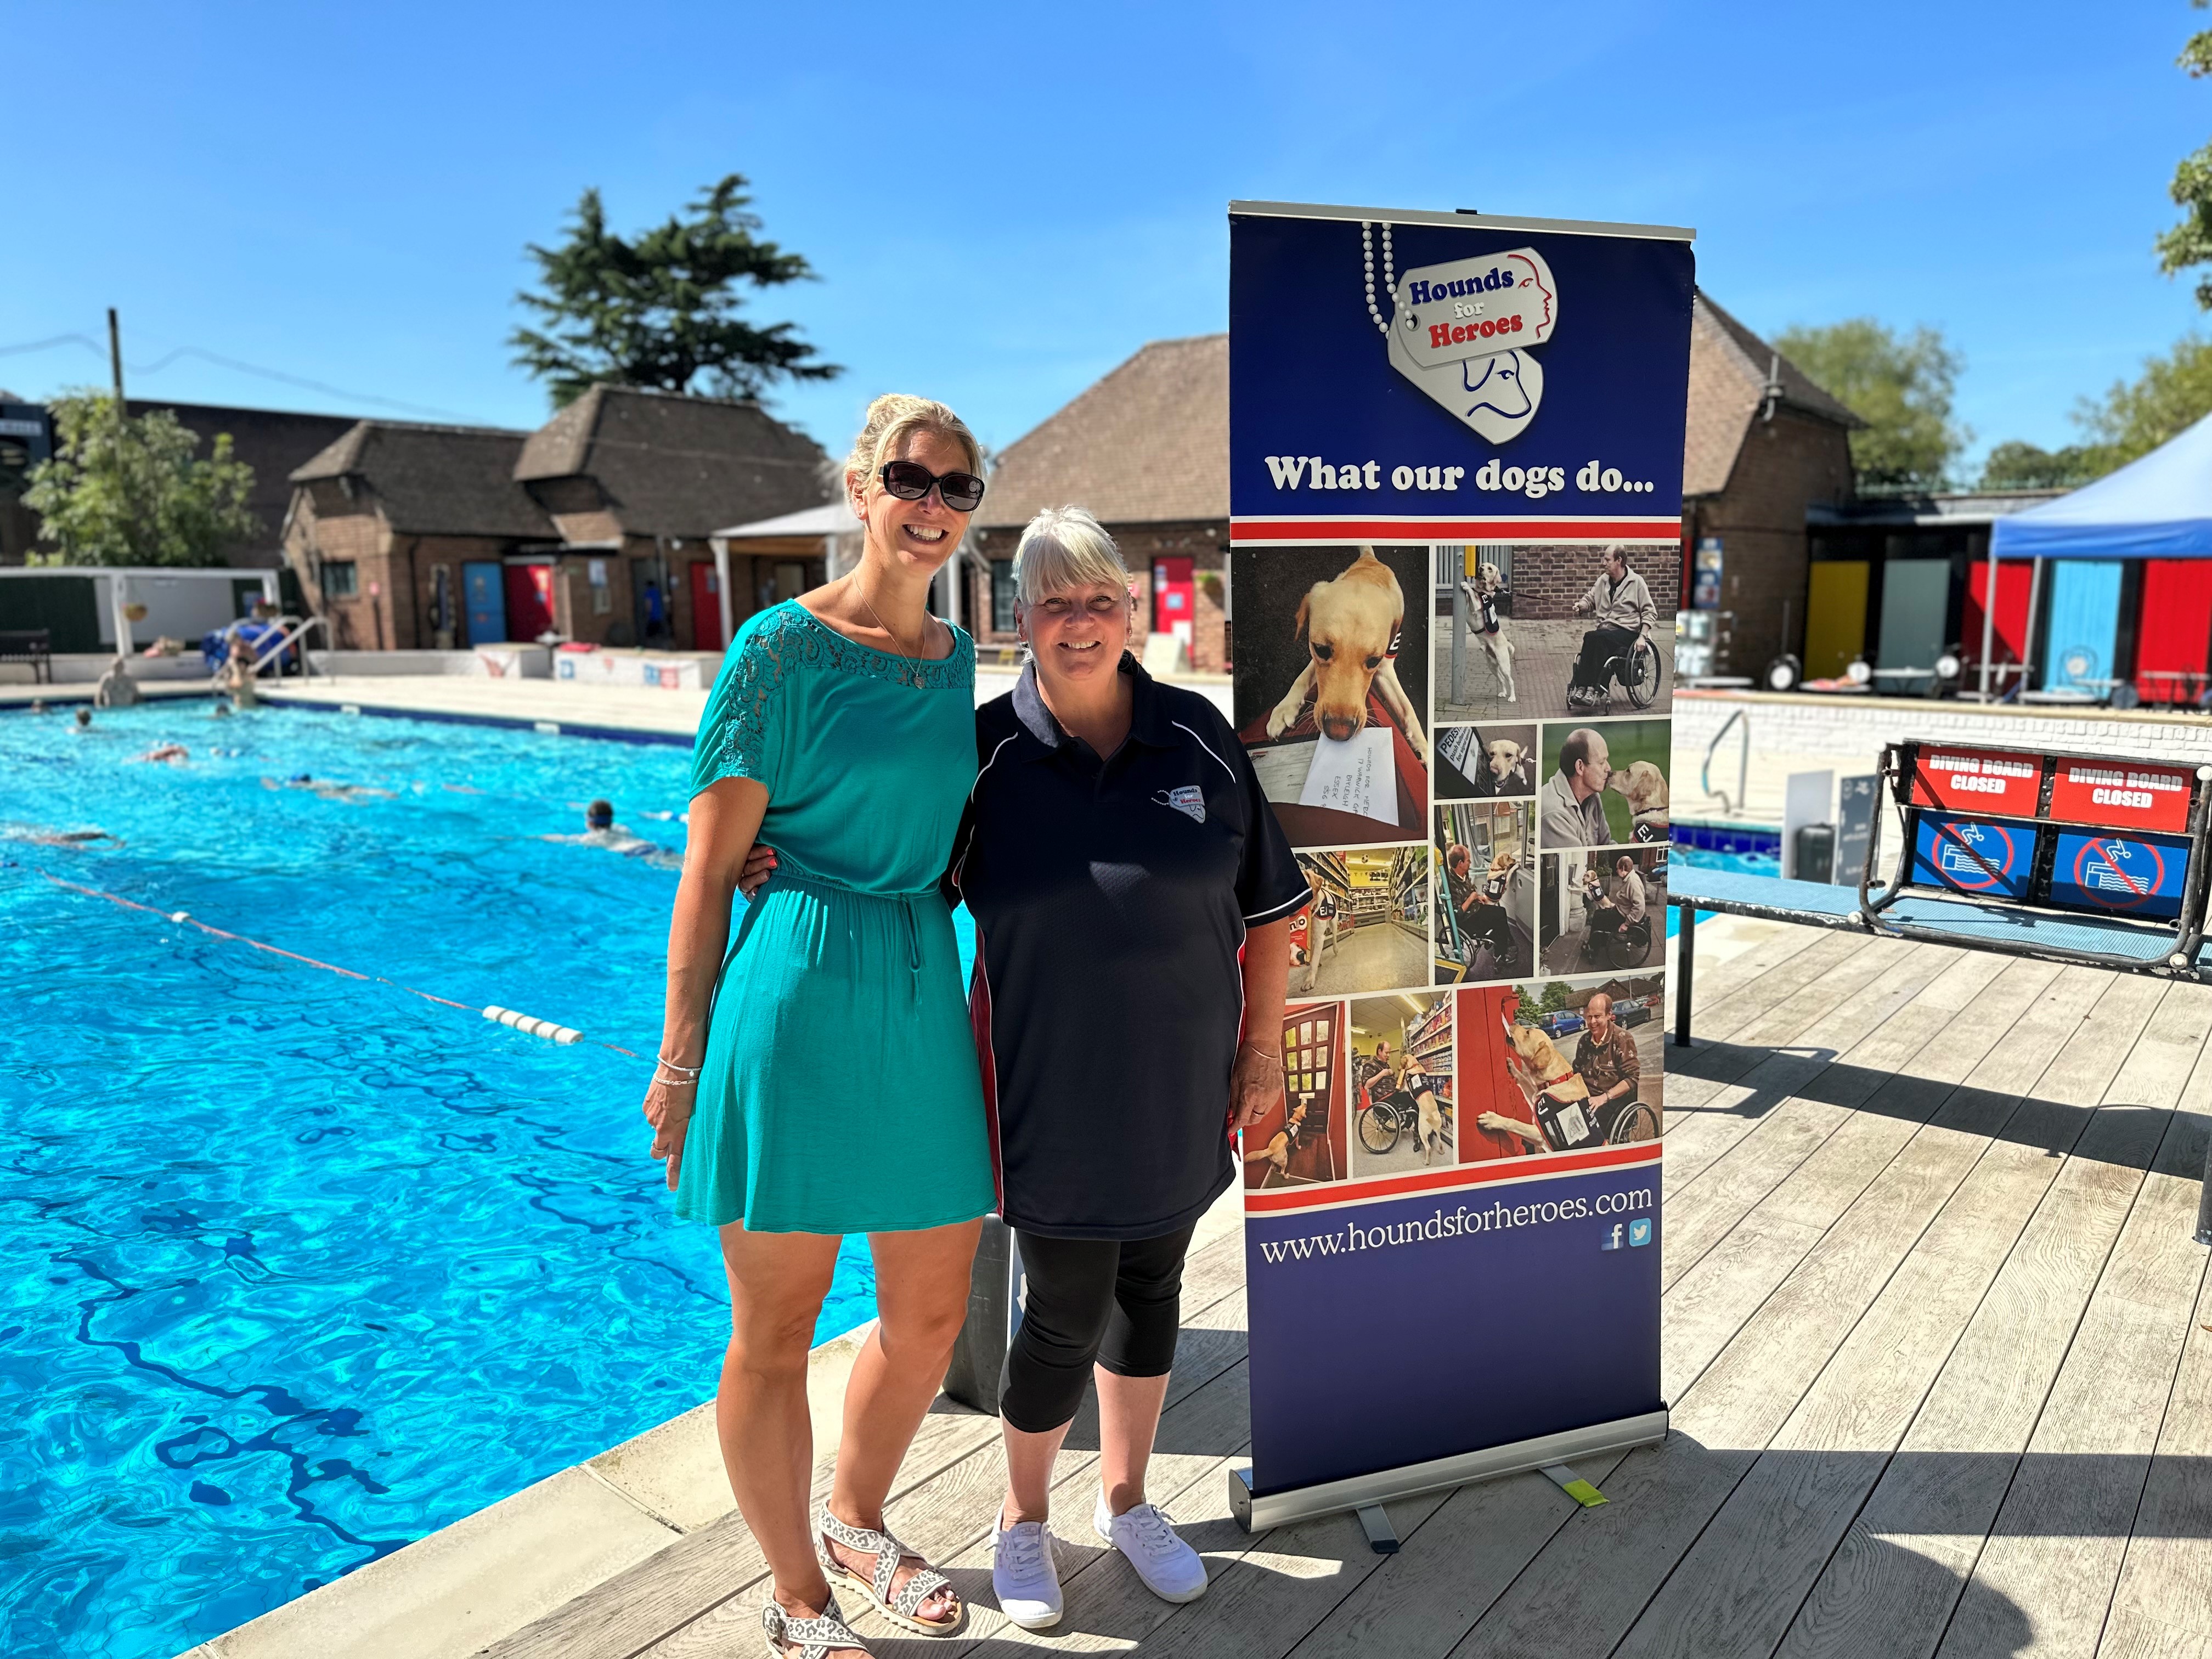 2 ladies by swimming pool by charity banner for Hounds for Heroes